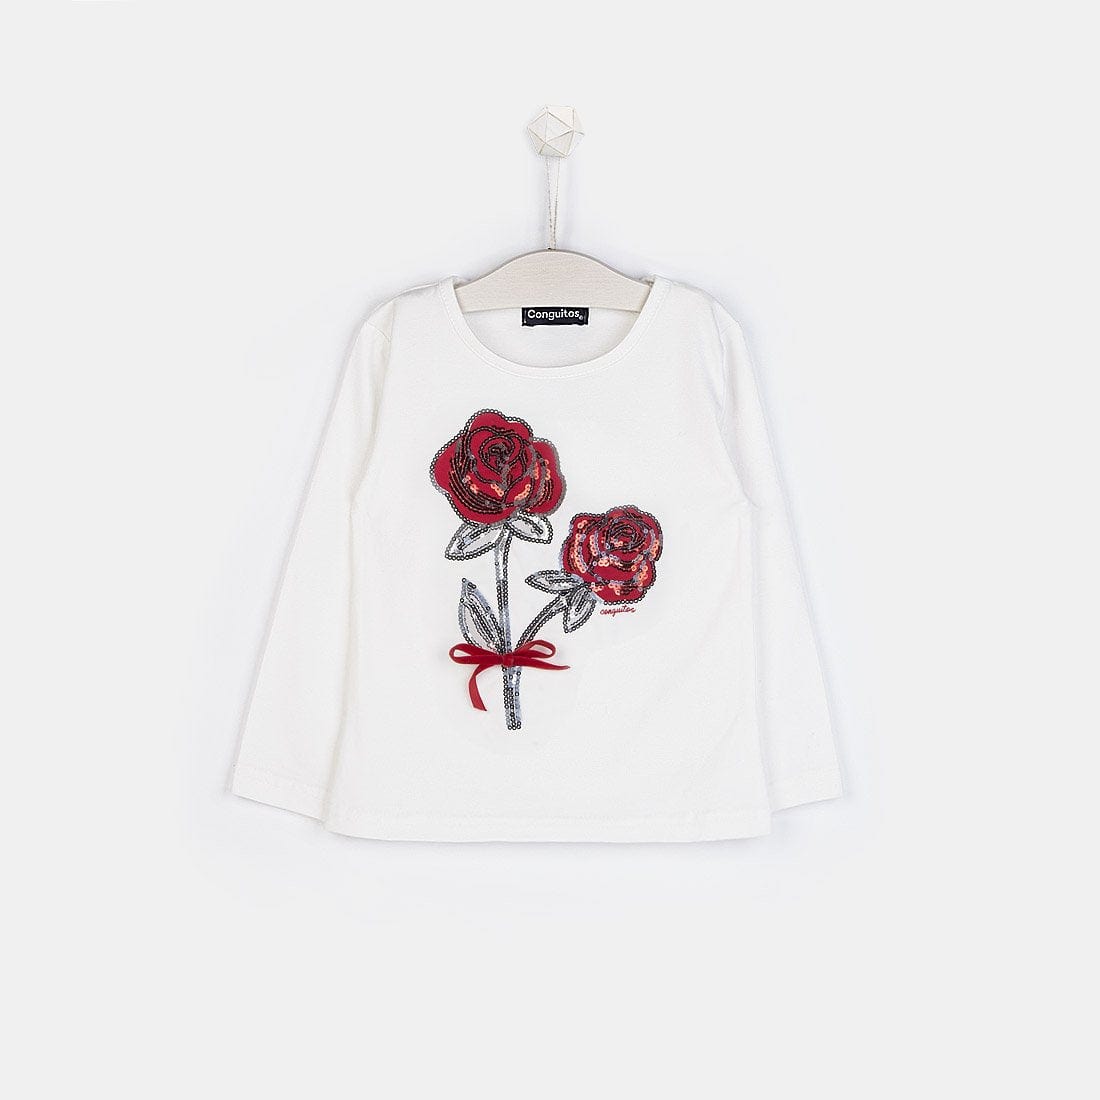 CONGUITOS TEXTIL Clothing Girls "Sequin Roses" White T-shirt